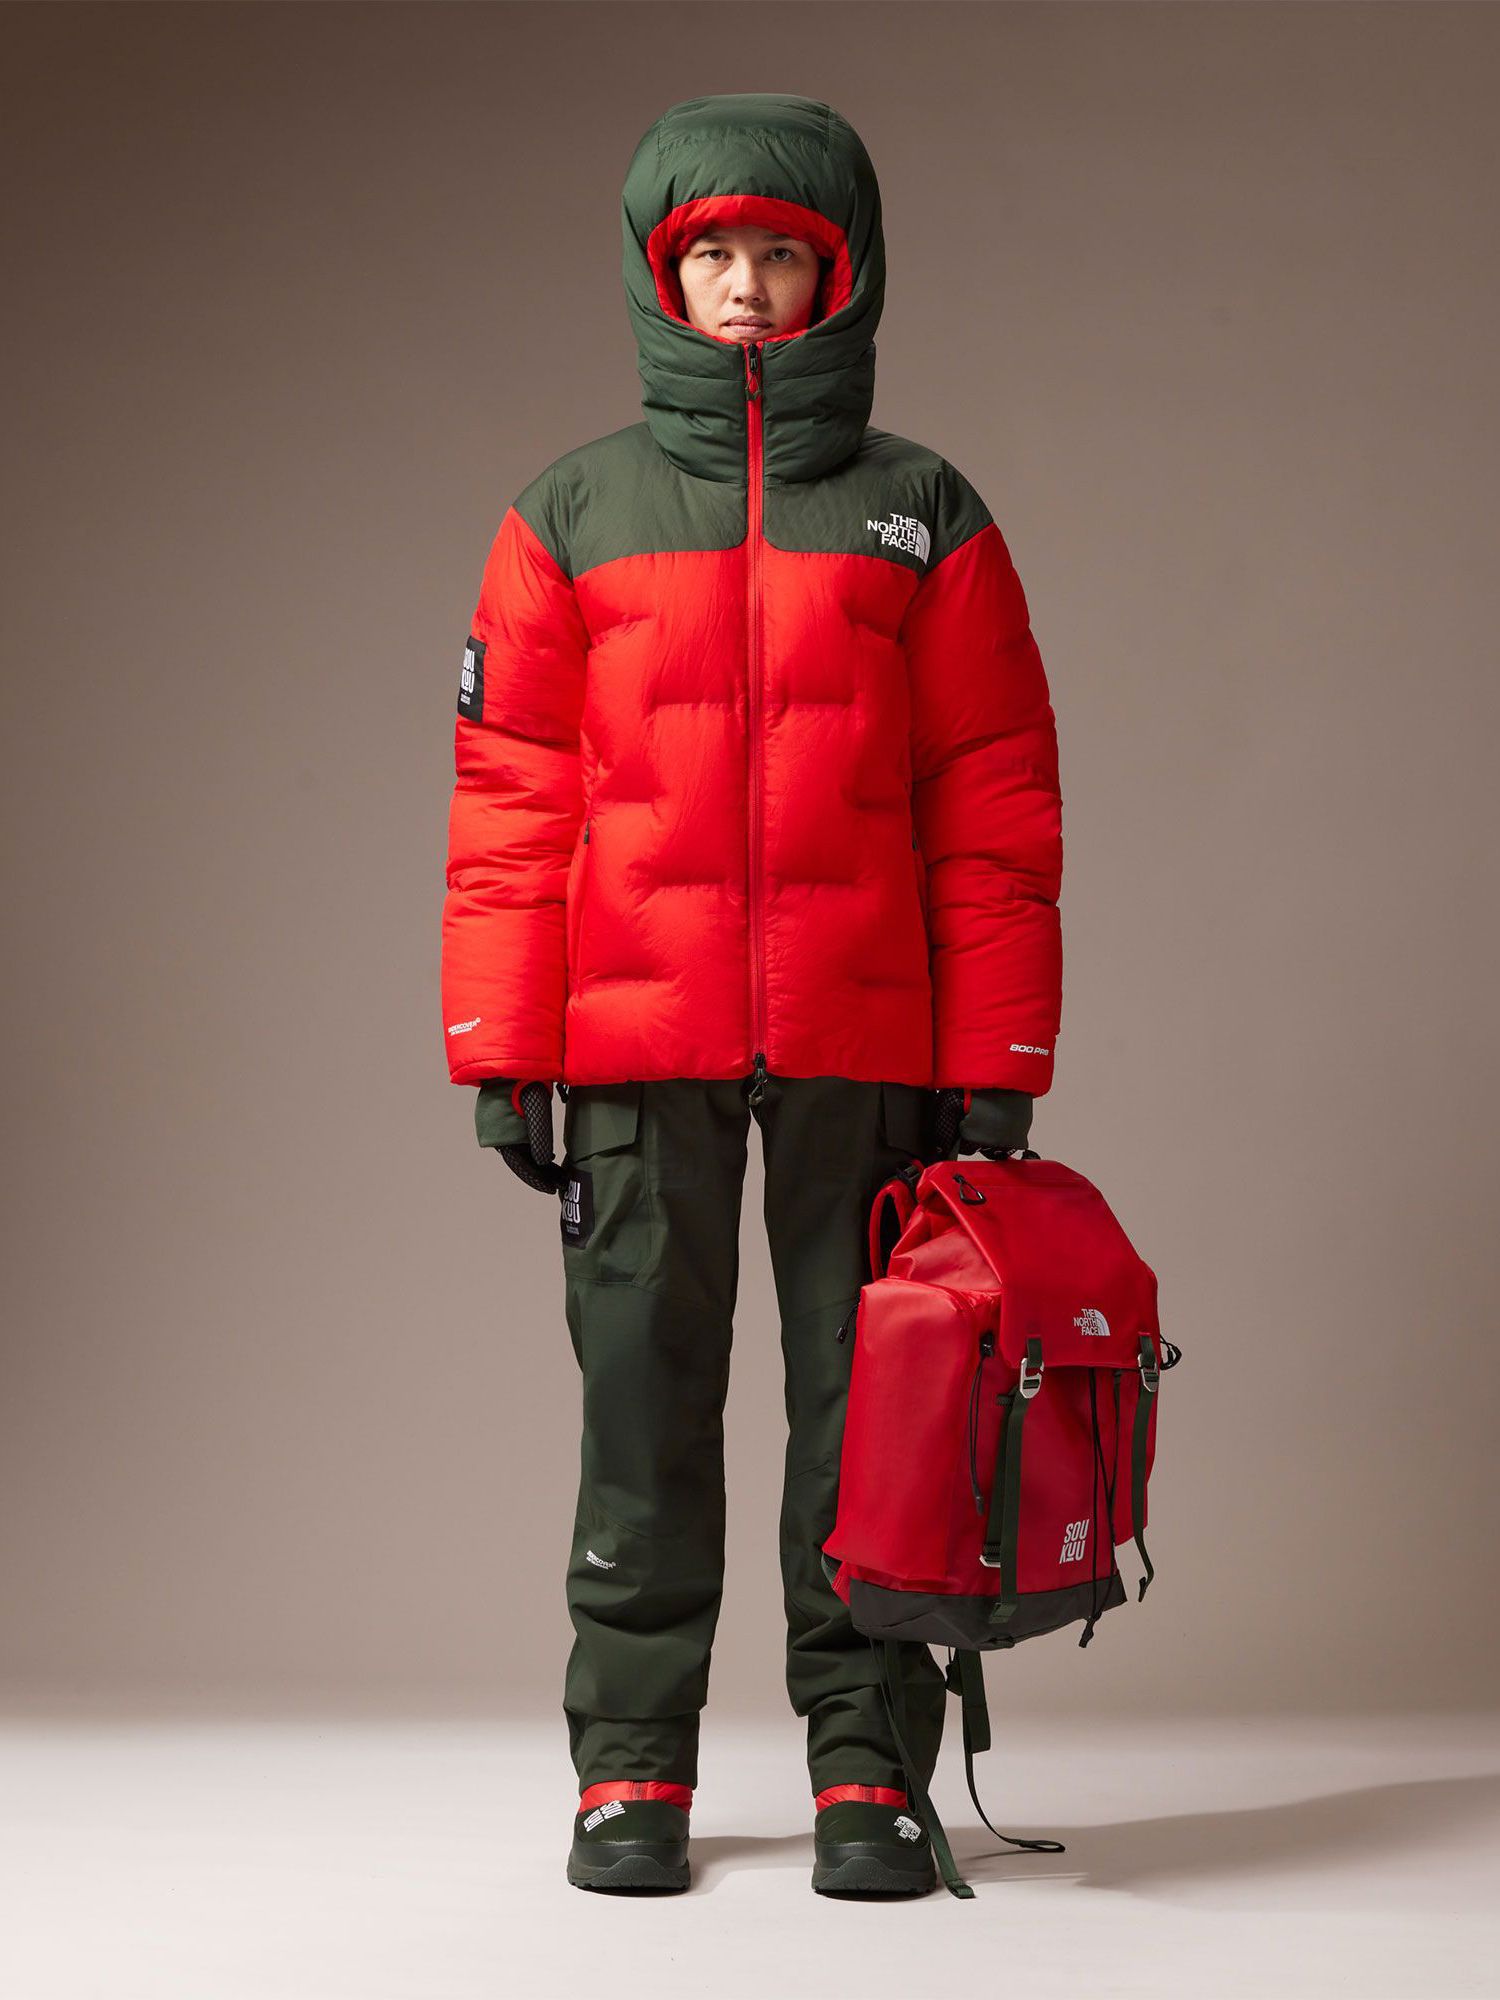 soukuuTHE NORTH FACE × UNDERCOVER ウエストバッグ - ショルダーバッグ